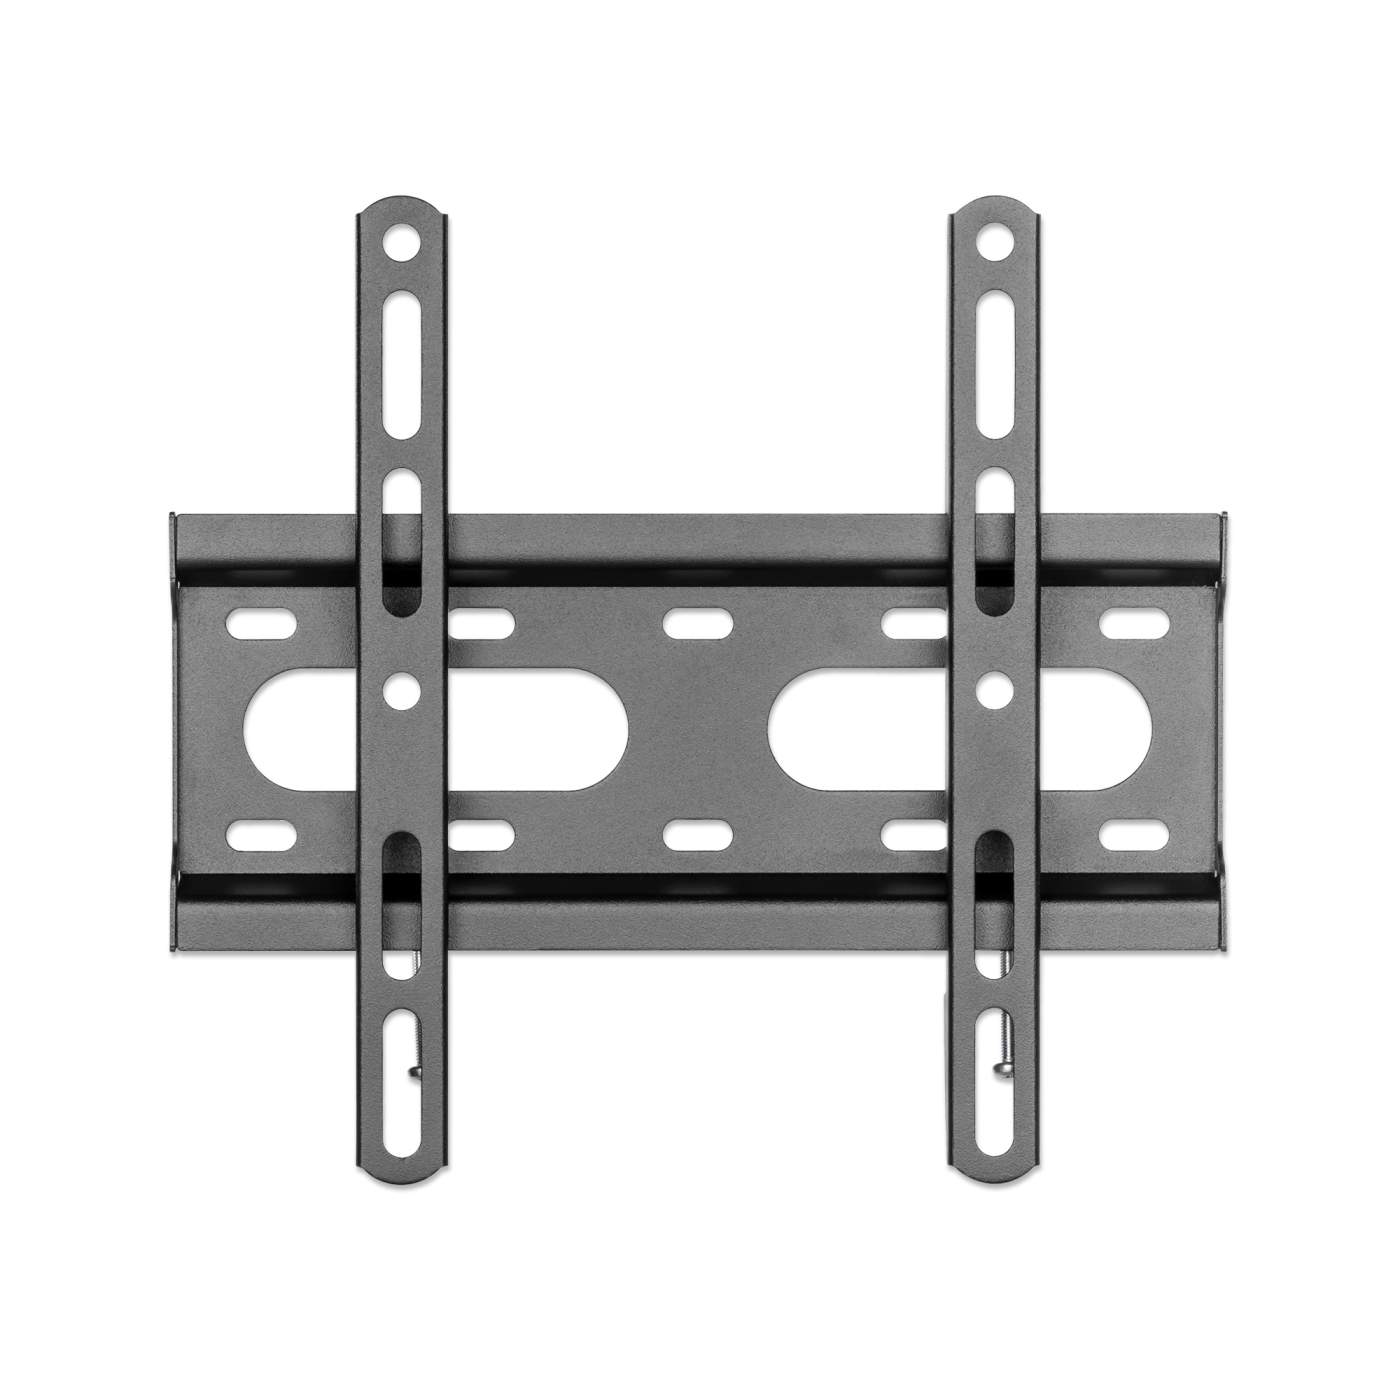 Manhattan Low-Profile Fixed TV Wall Mount (462259)